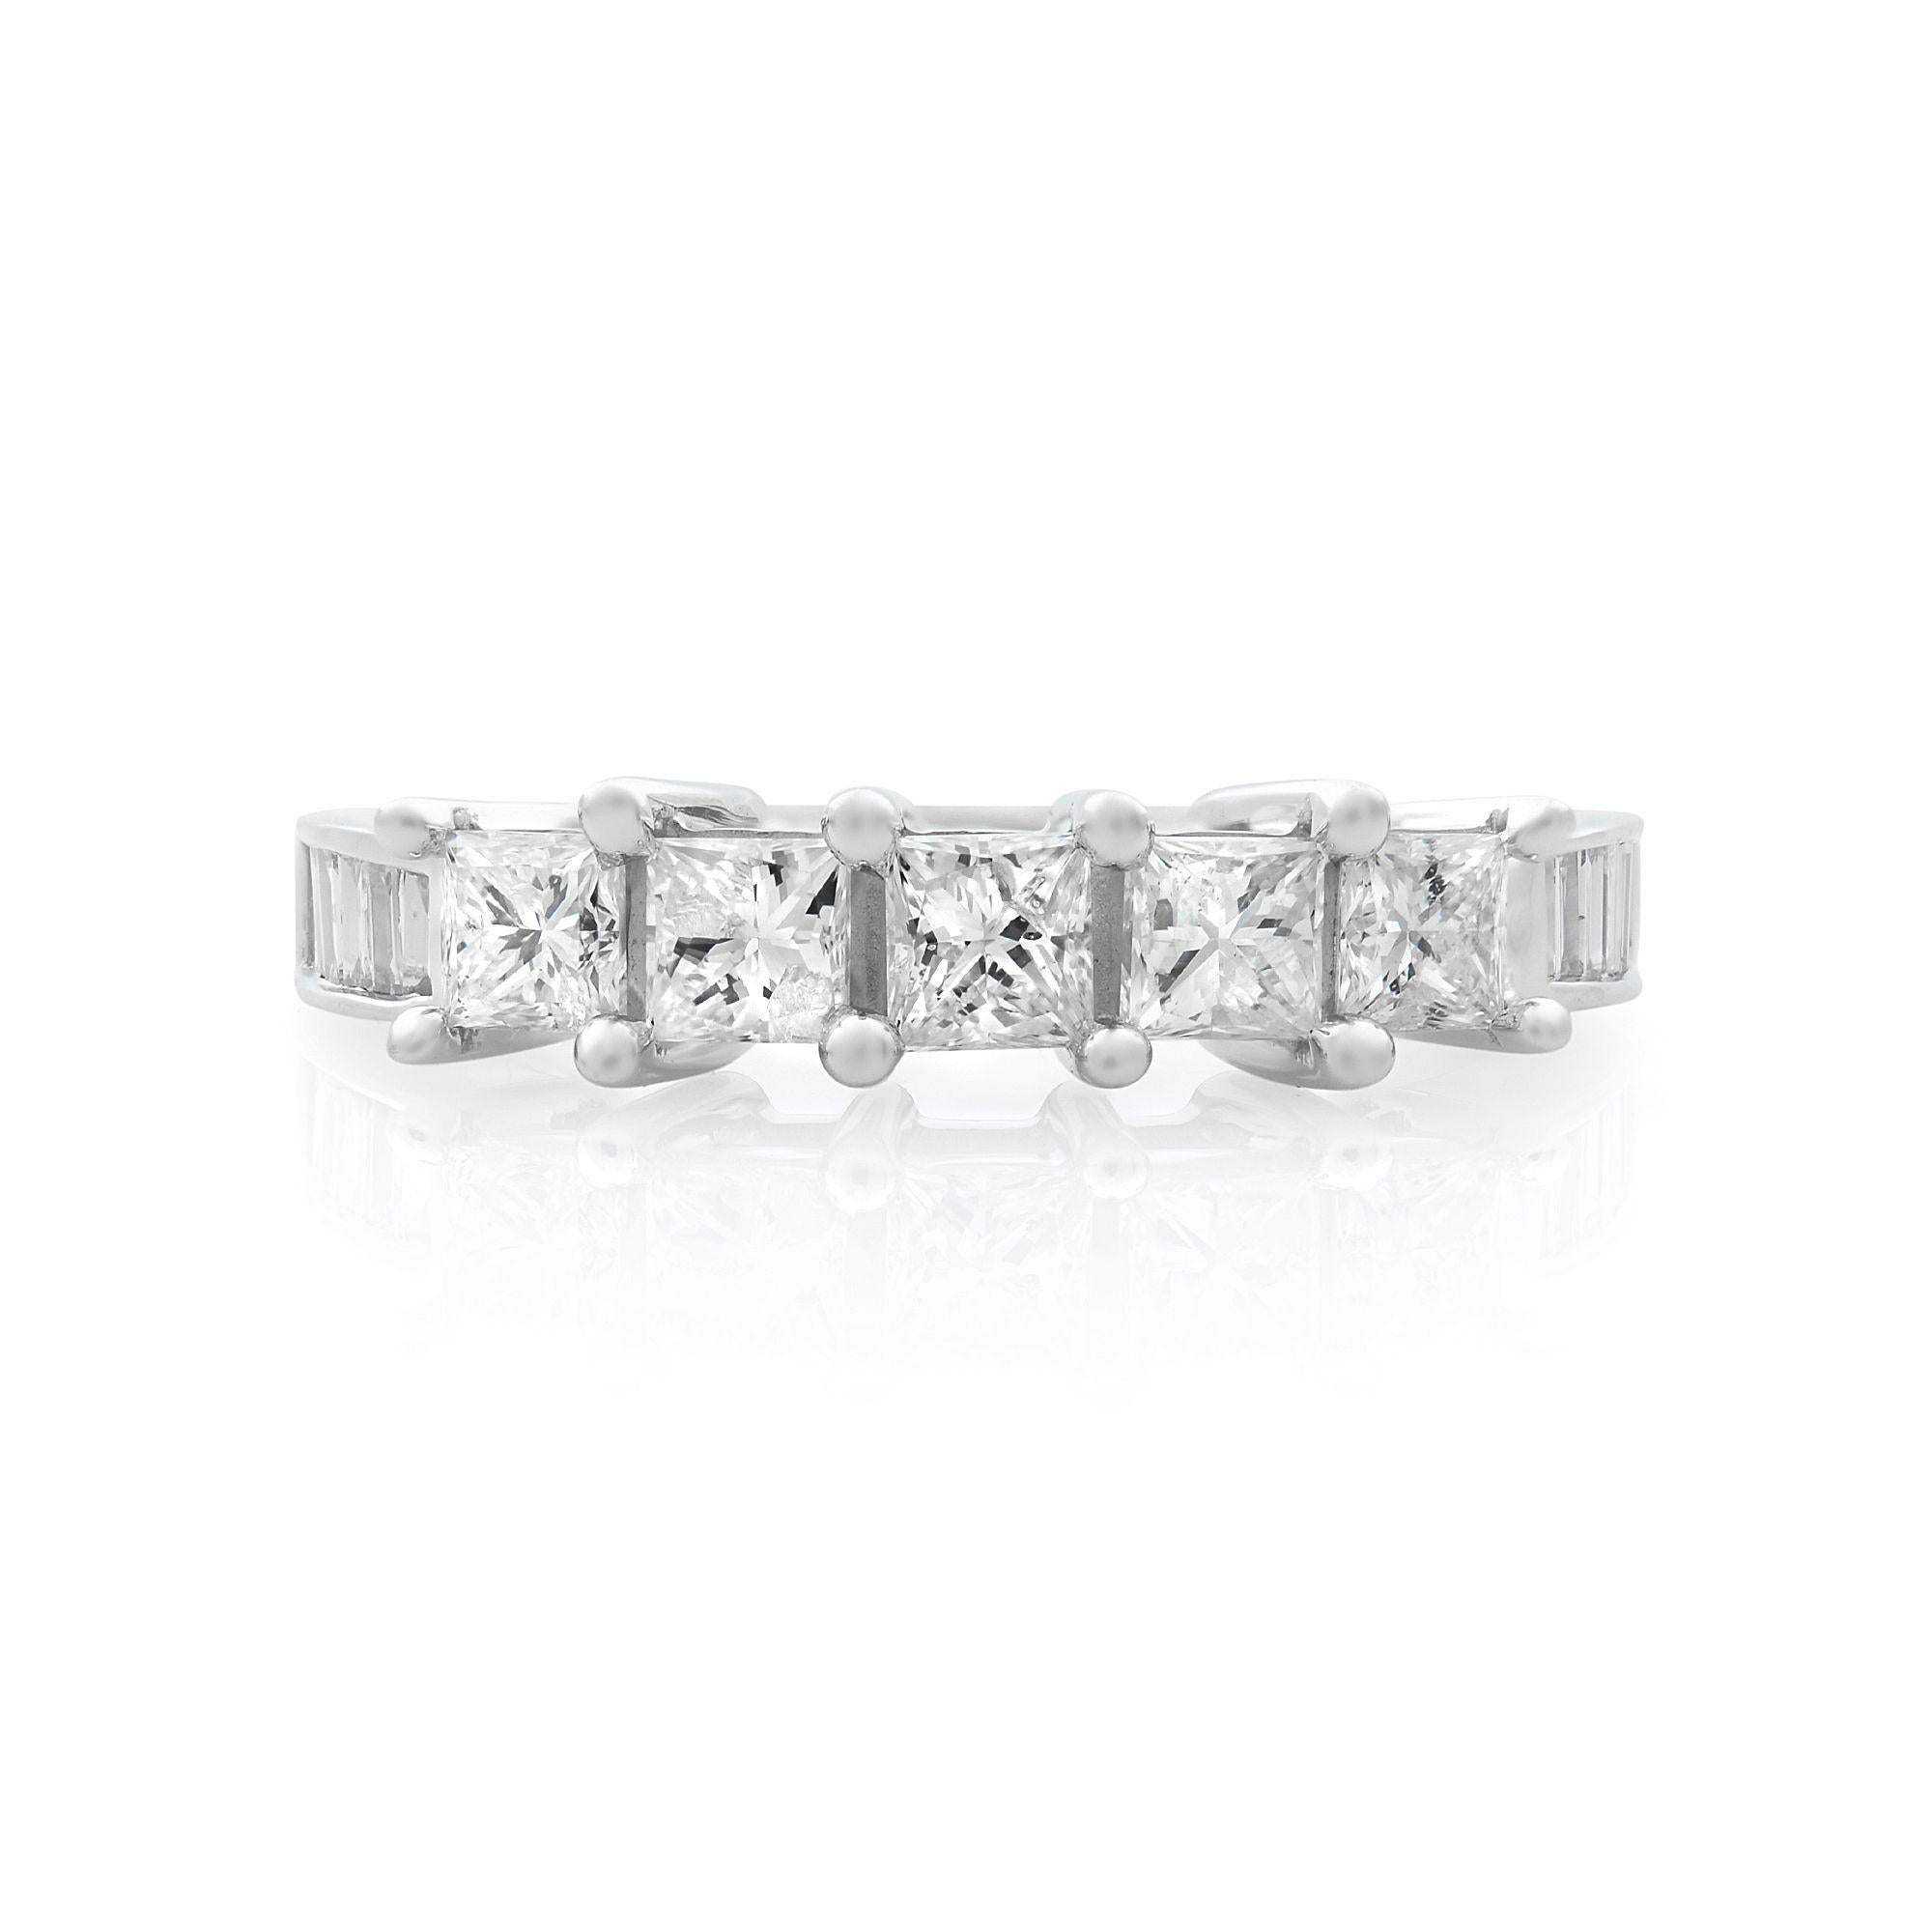 This charming anniversary ring is so simple and gorgeous. The ring is expertly handmade of 14k white gold with shiny polish. This ring is beautifully accented with five white princess cut diamonds and baguettes weighting aprox. 1.15 carat in total.